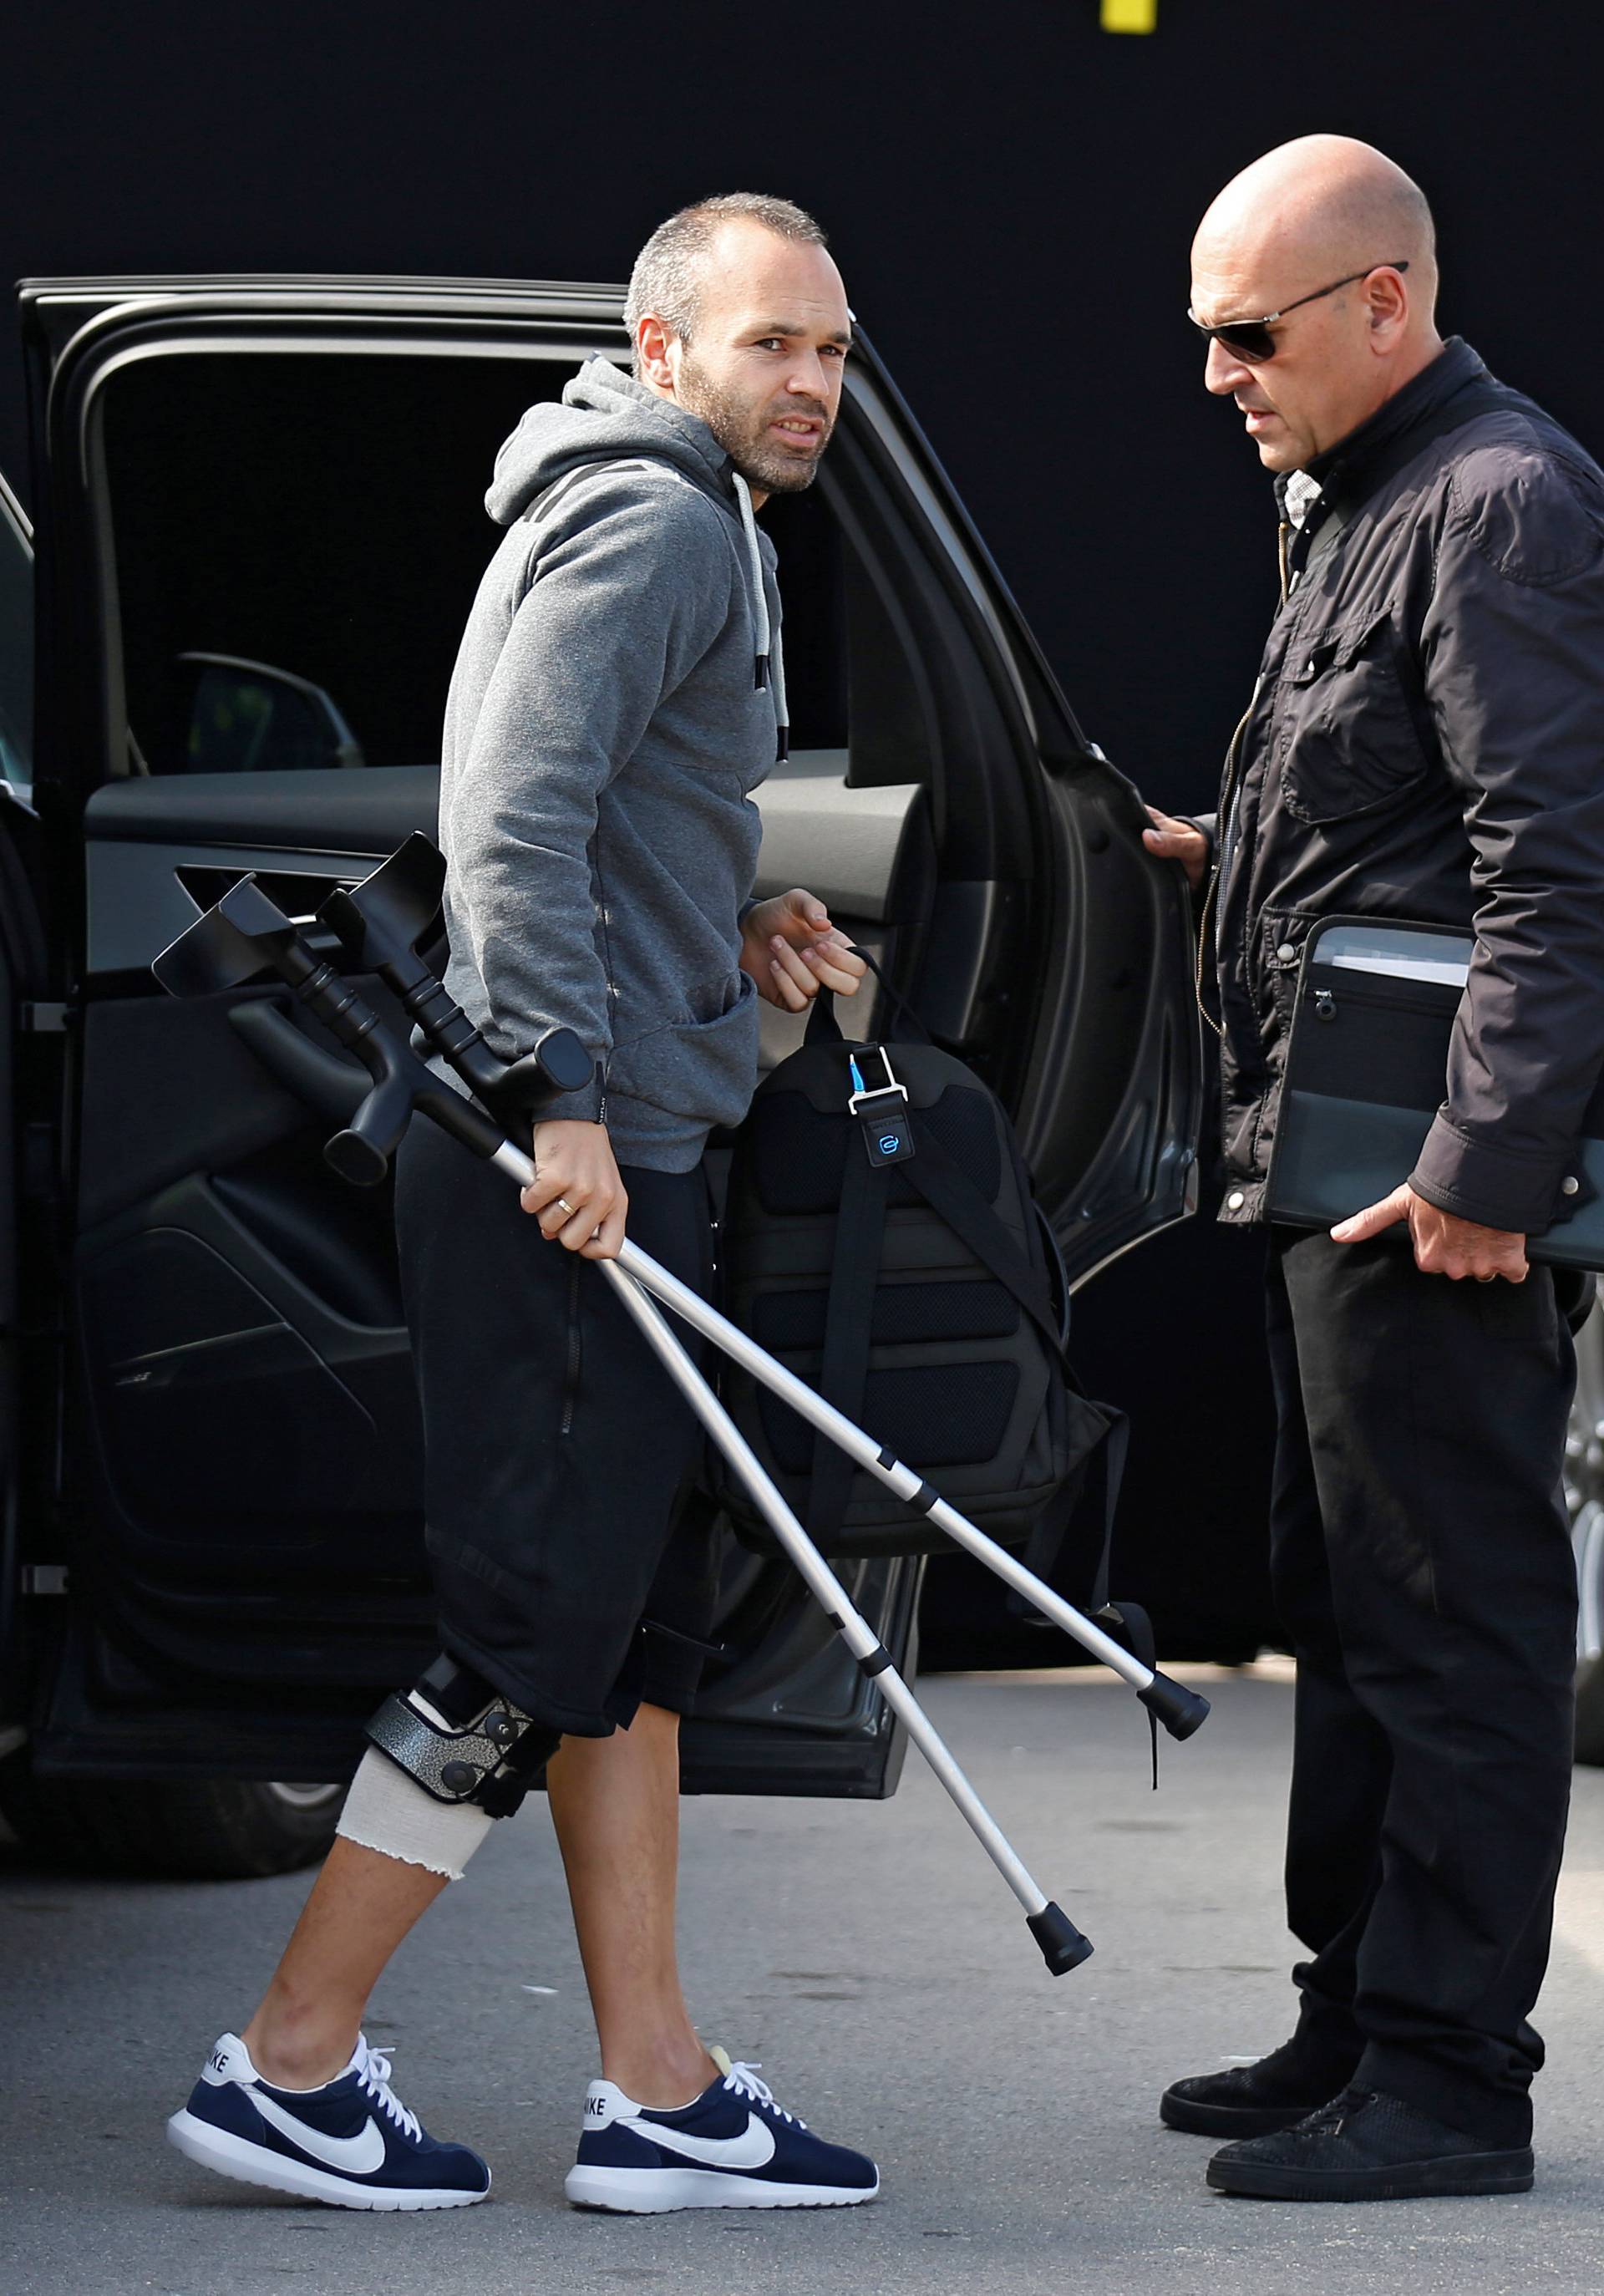 Barcelona's injured soccer player Iniesta takes part in a commercial event near Camp Nou stadium in Barcelona